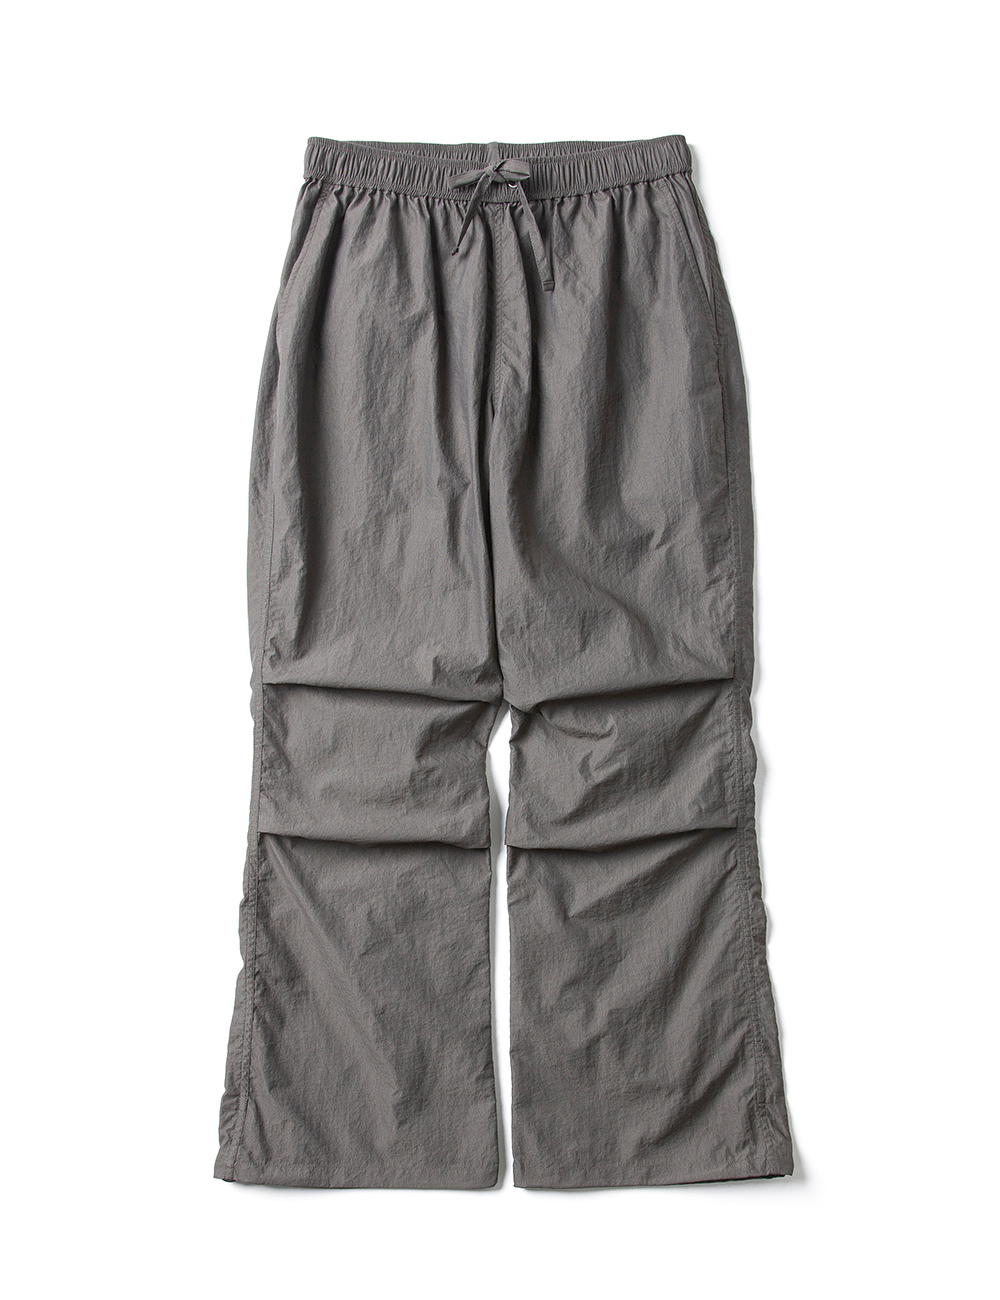 GLOSSY EASY PANTS (OLIVE GREY)